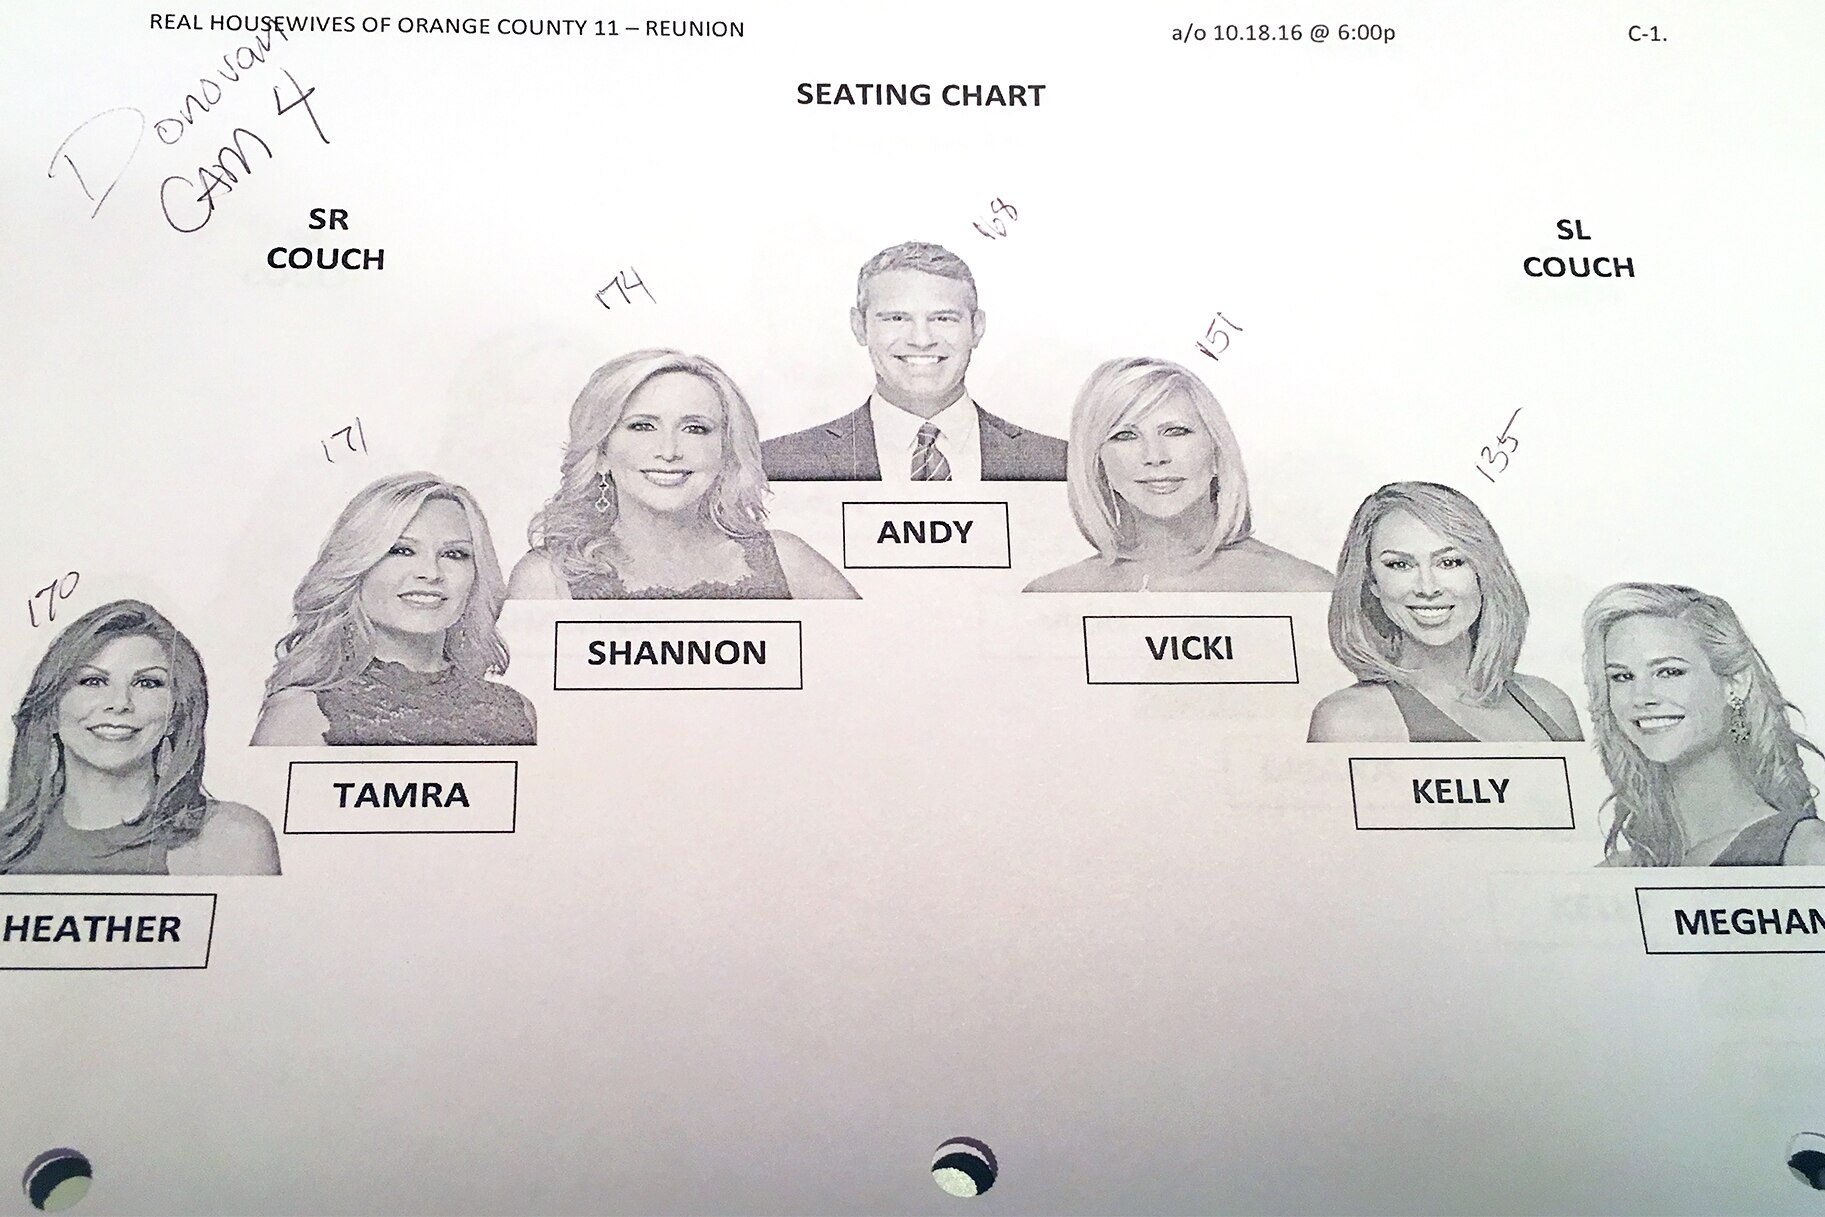 http://www.bravotv.com/sites/nbcubravotv/files/styles/large/public/dish-102016-the-real-housewives-of-orange-county-reunion-seating-chart.jpg?itok=_4I12pmL